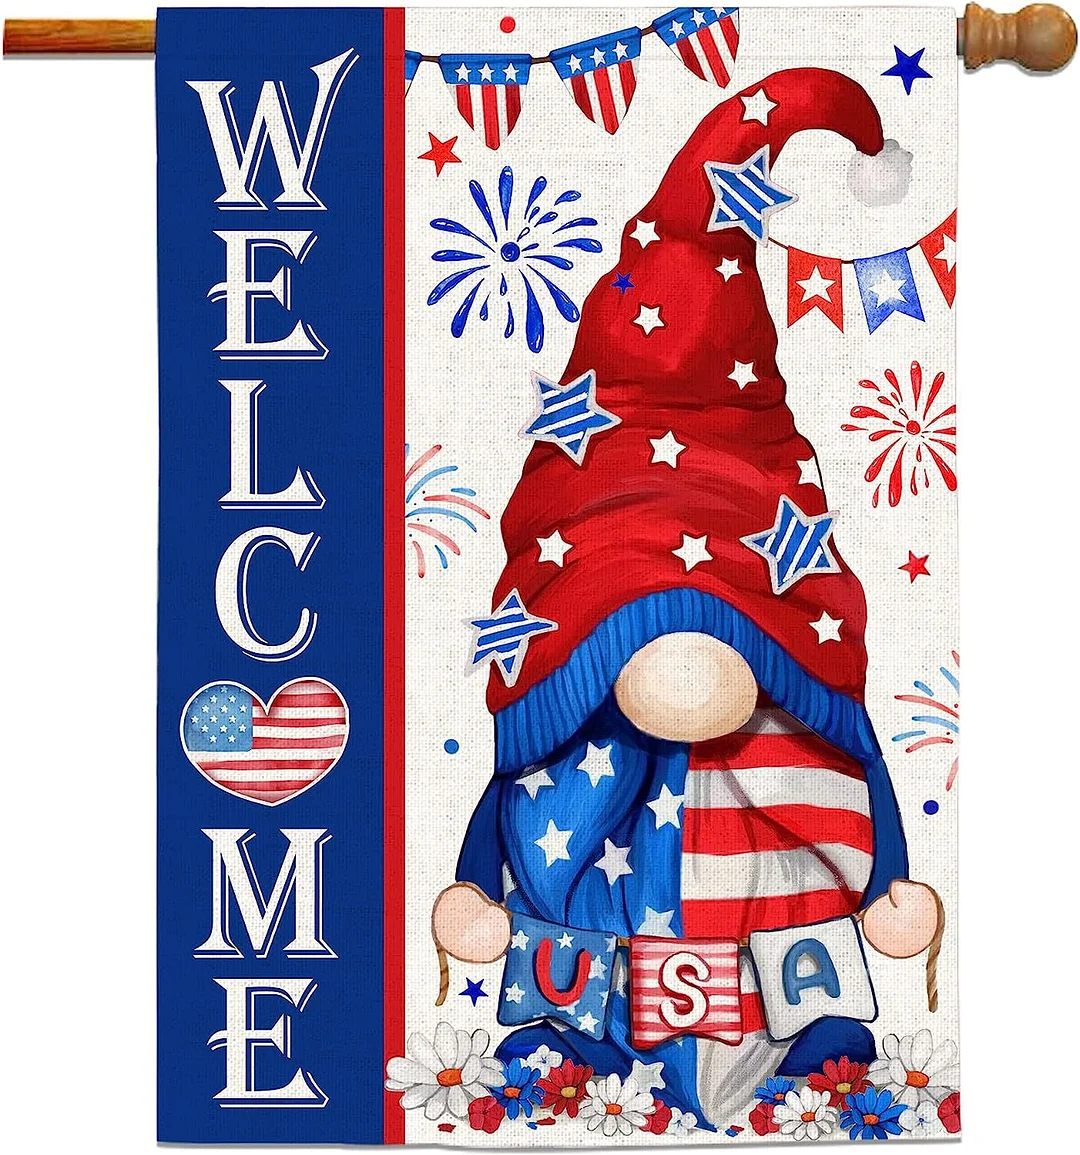 💖"Welcome" Banner 🎁American Patriot Christian Cross Flag